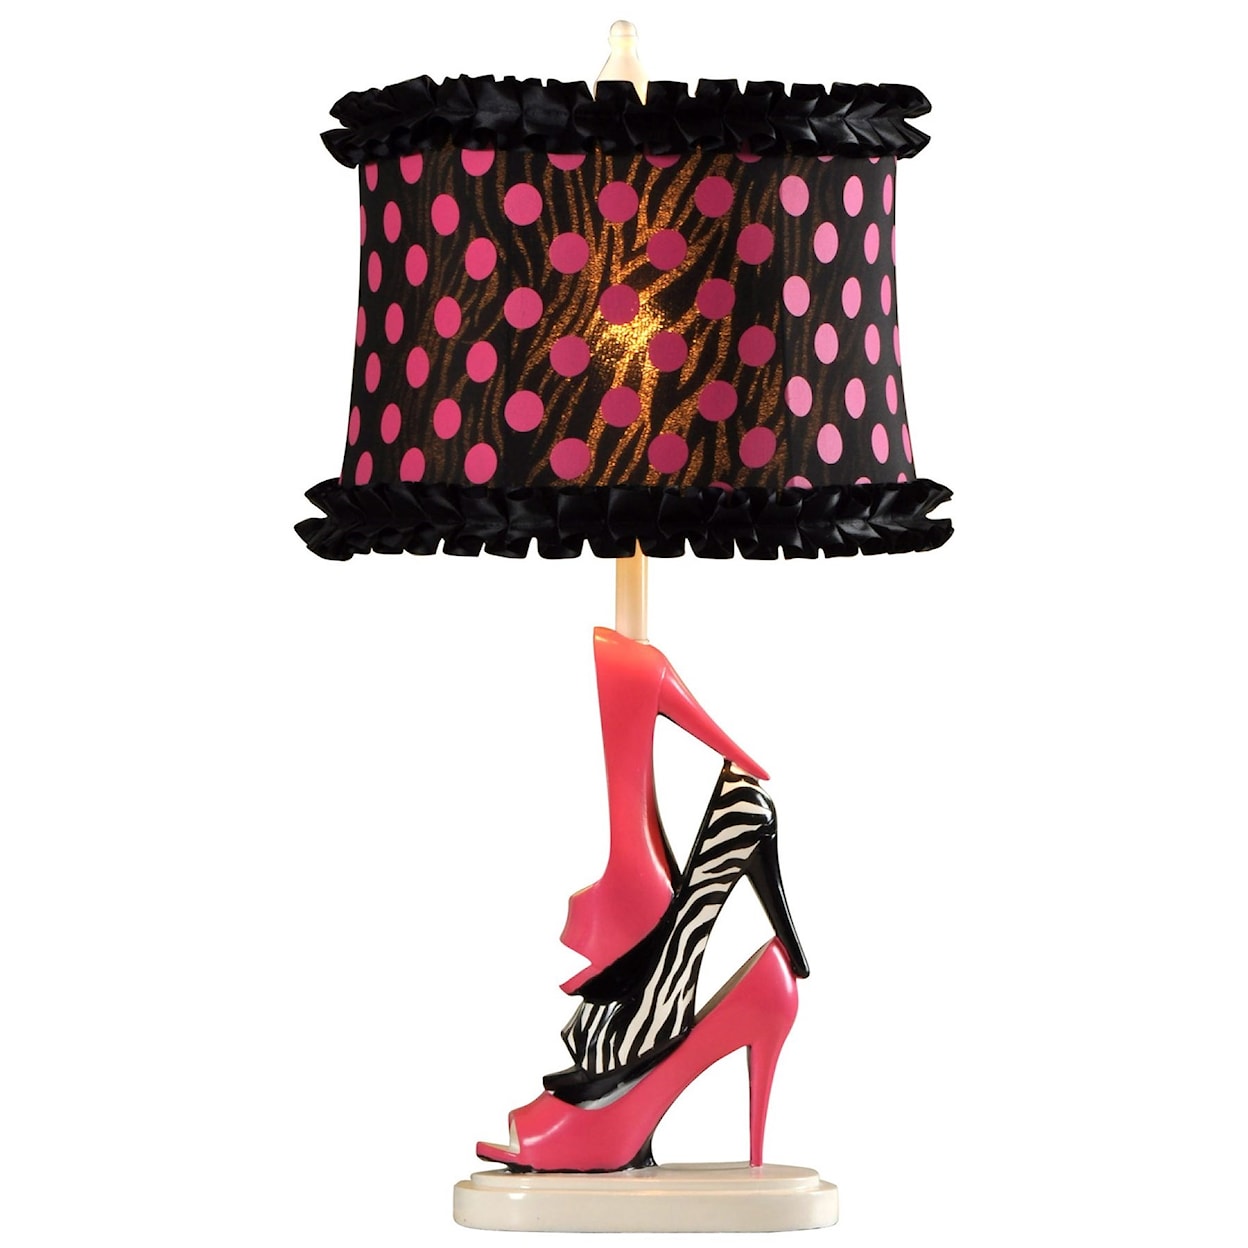 StyleCraft Lamps Diva Shoes Pink and Black Table Lamp